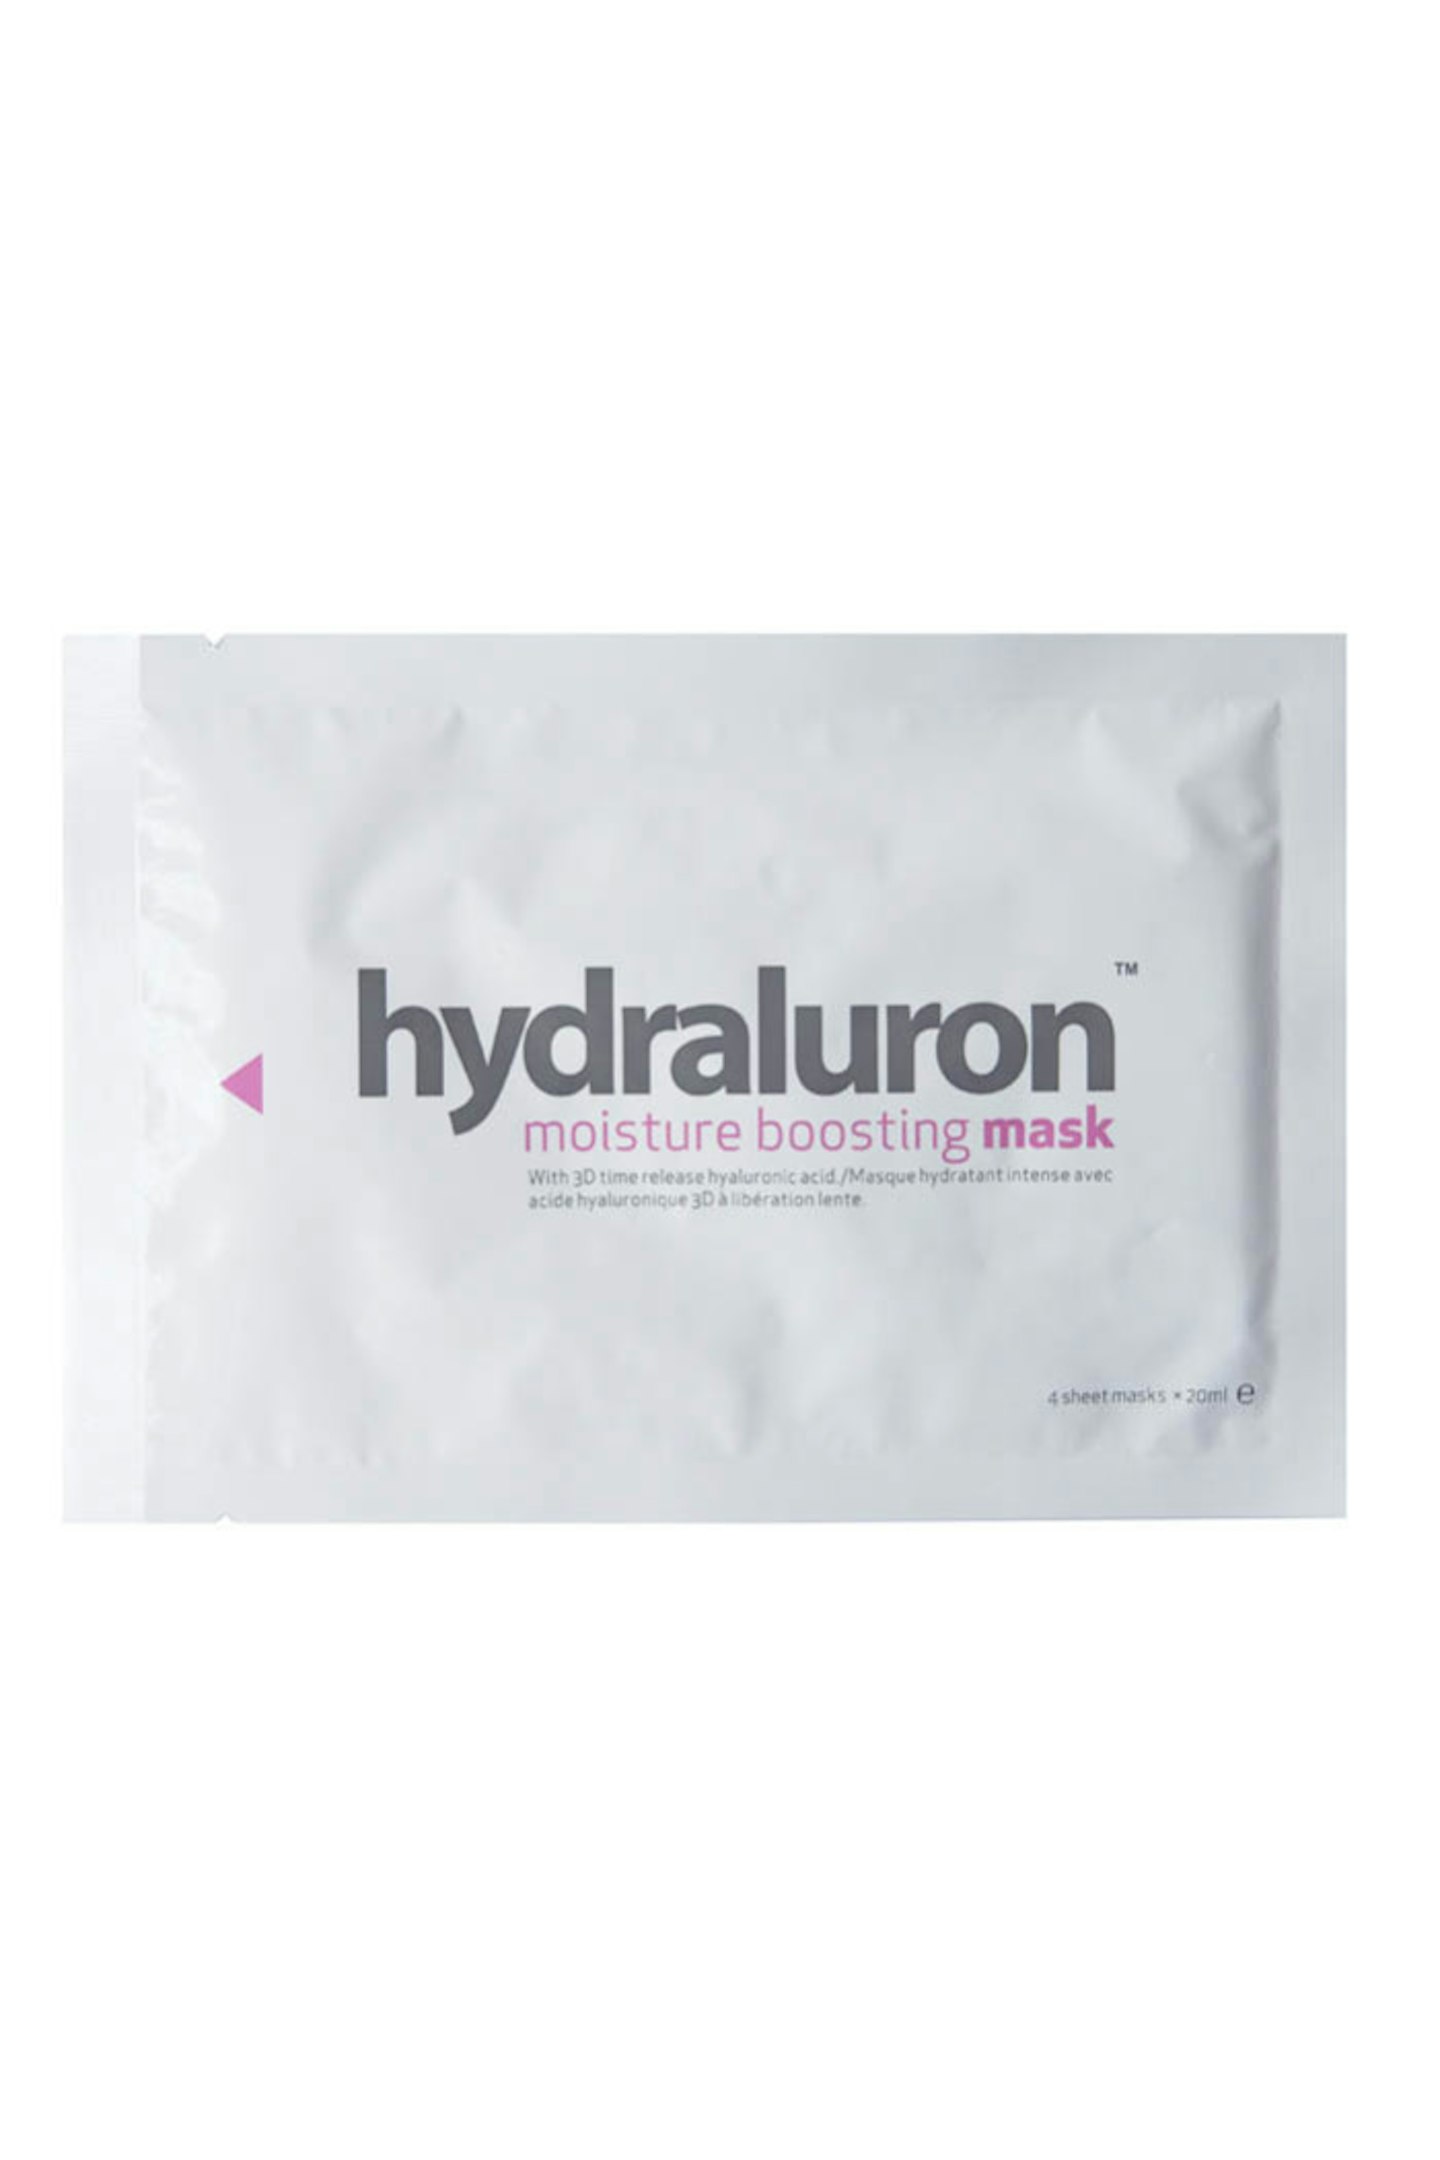 Indeed Hydraluron Moisture Boosting Mask, £19.99